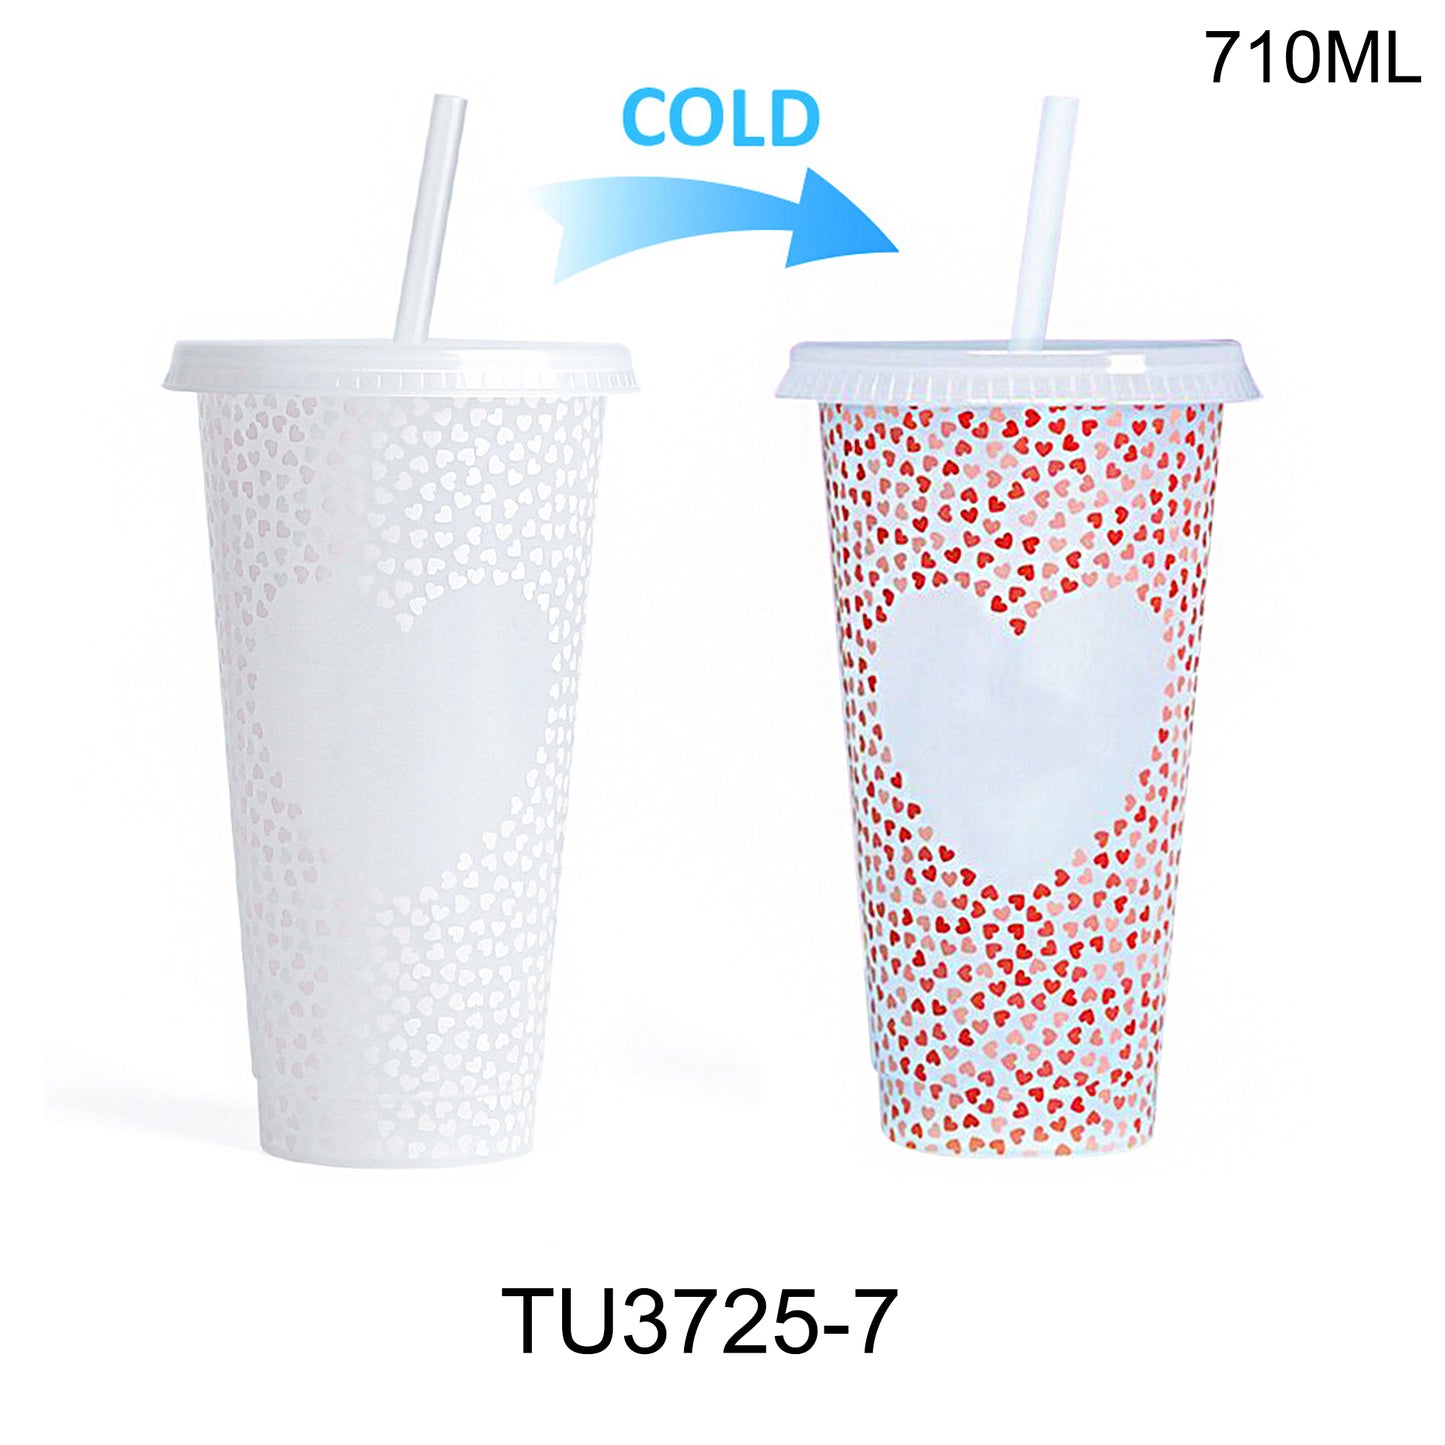 COLOR CHANGING HEART VENTI TUMBLER WITH STRAW 3725-7 (12PC)